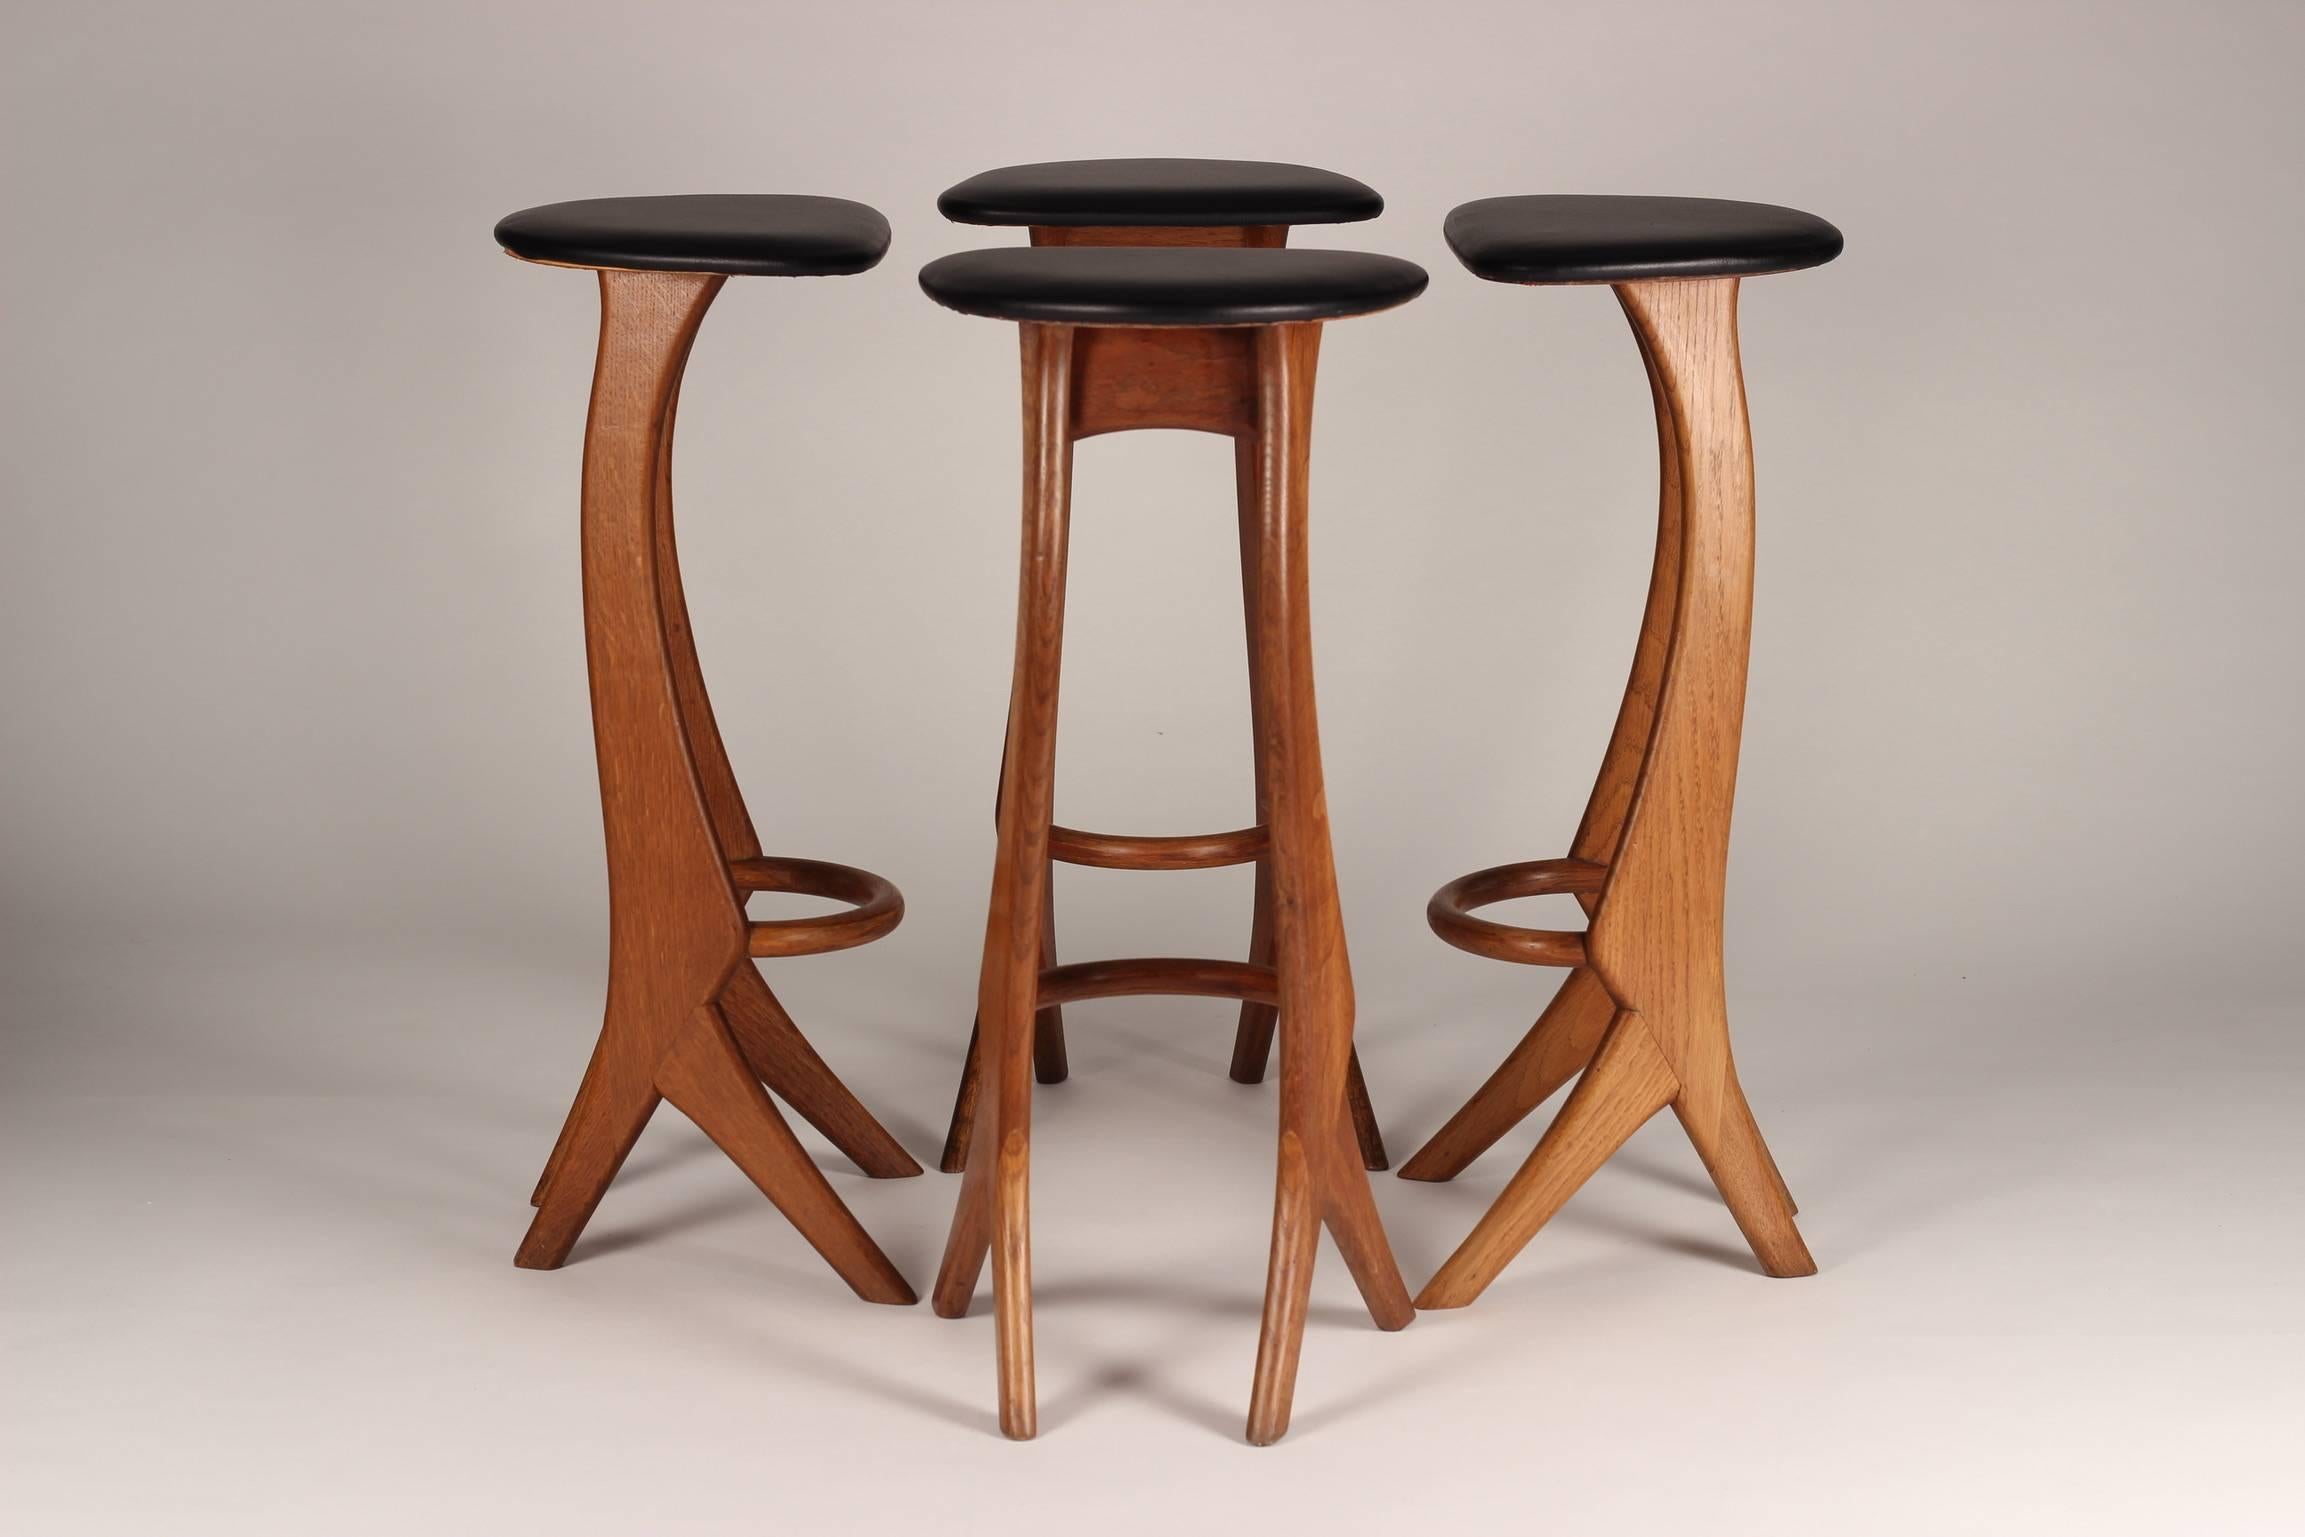 Midcentury Barstools in Teak and Leather by Reyway 1